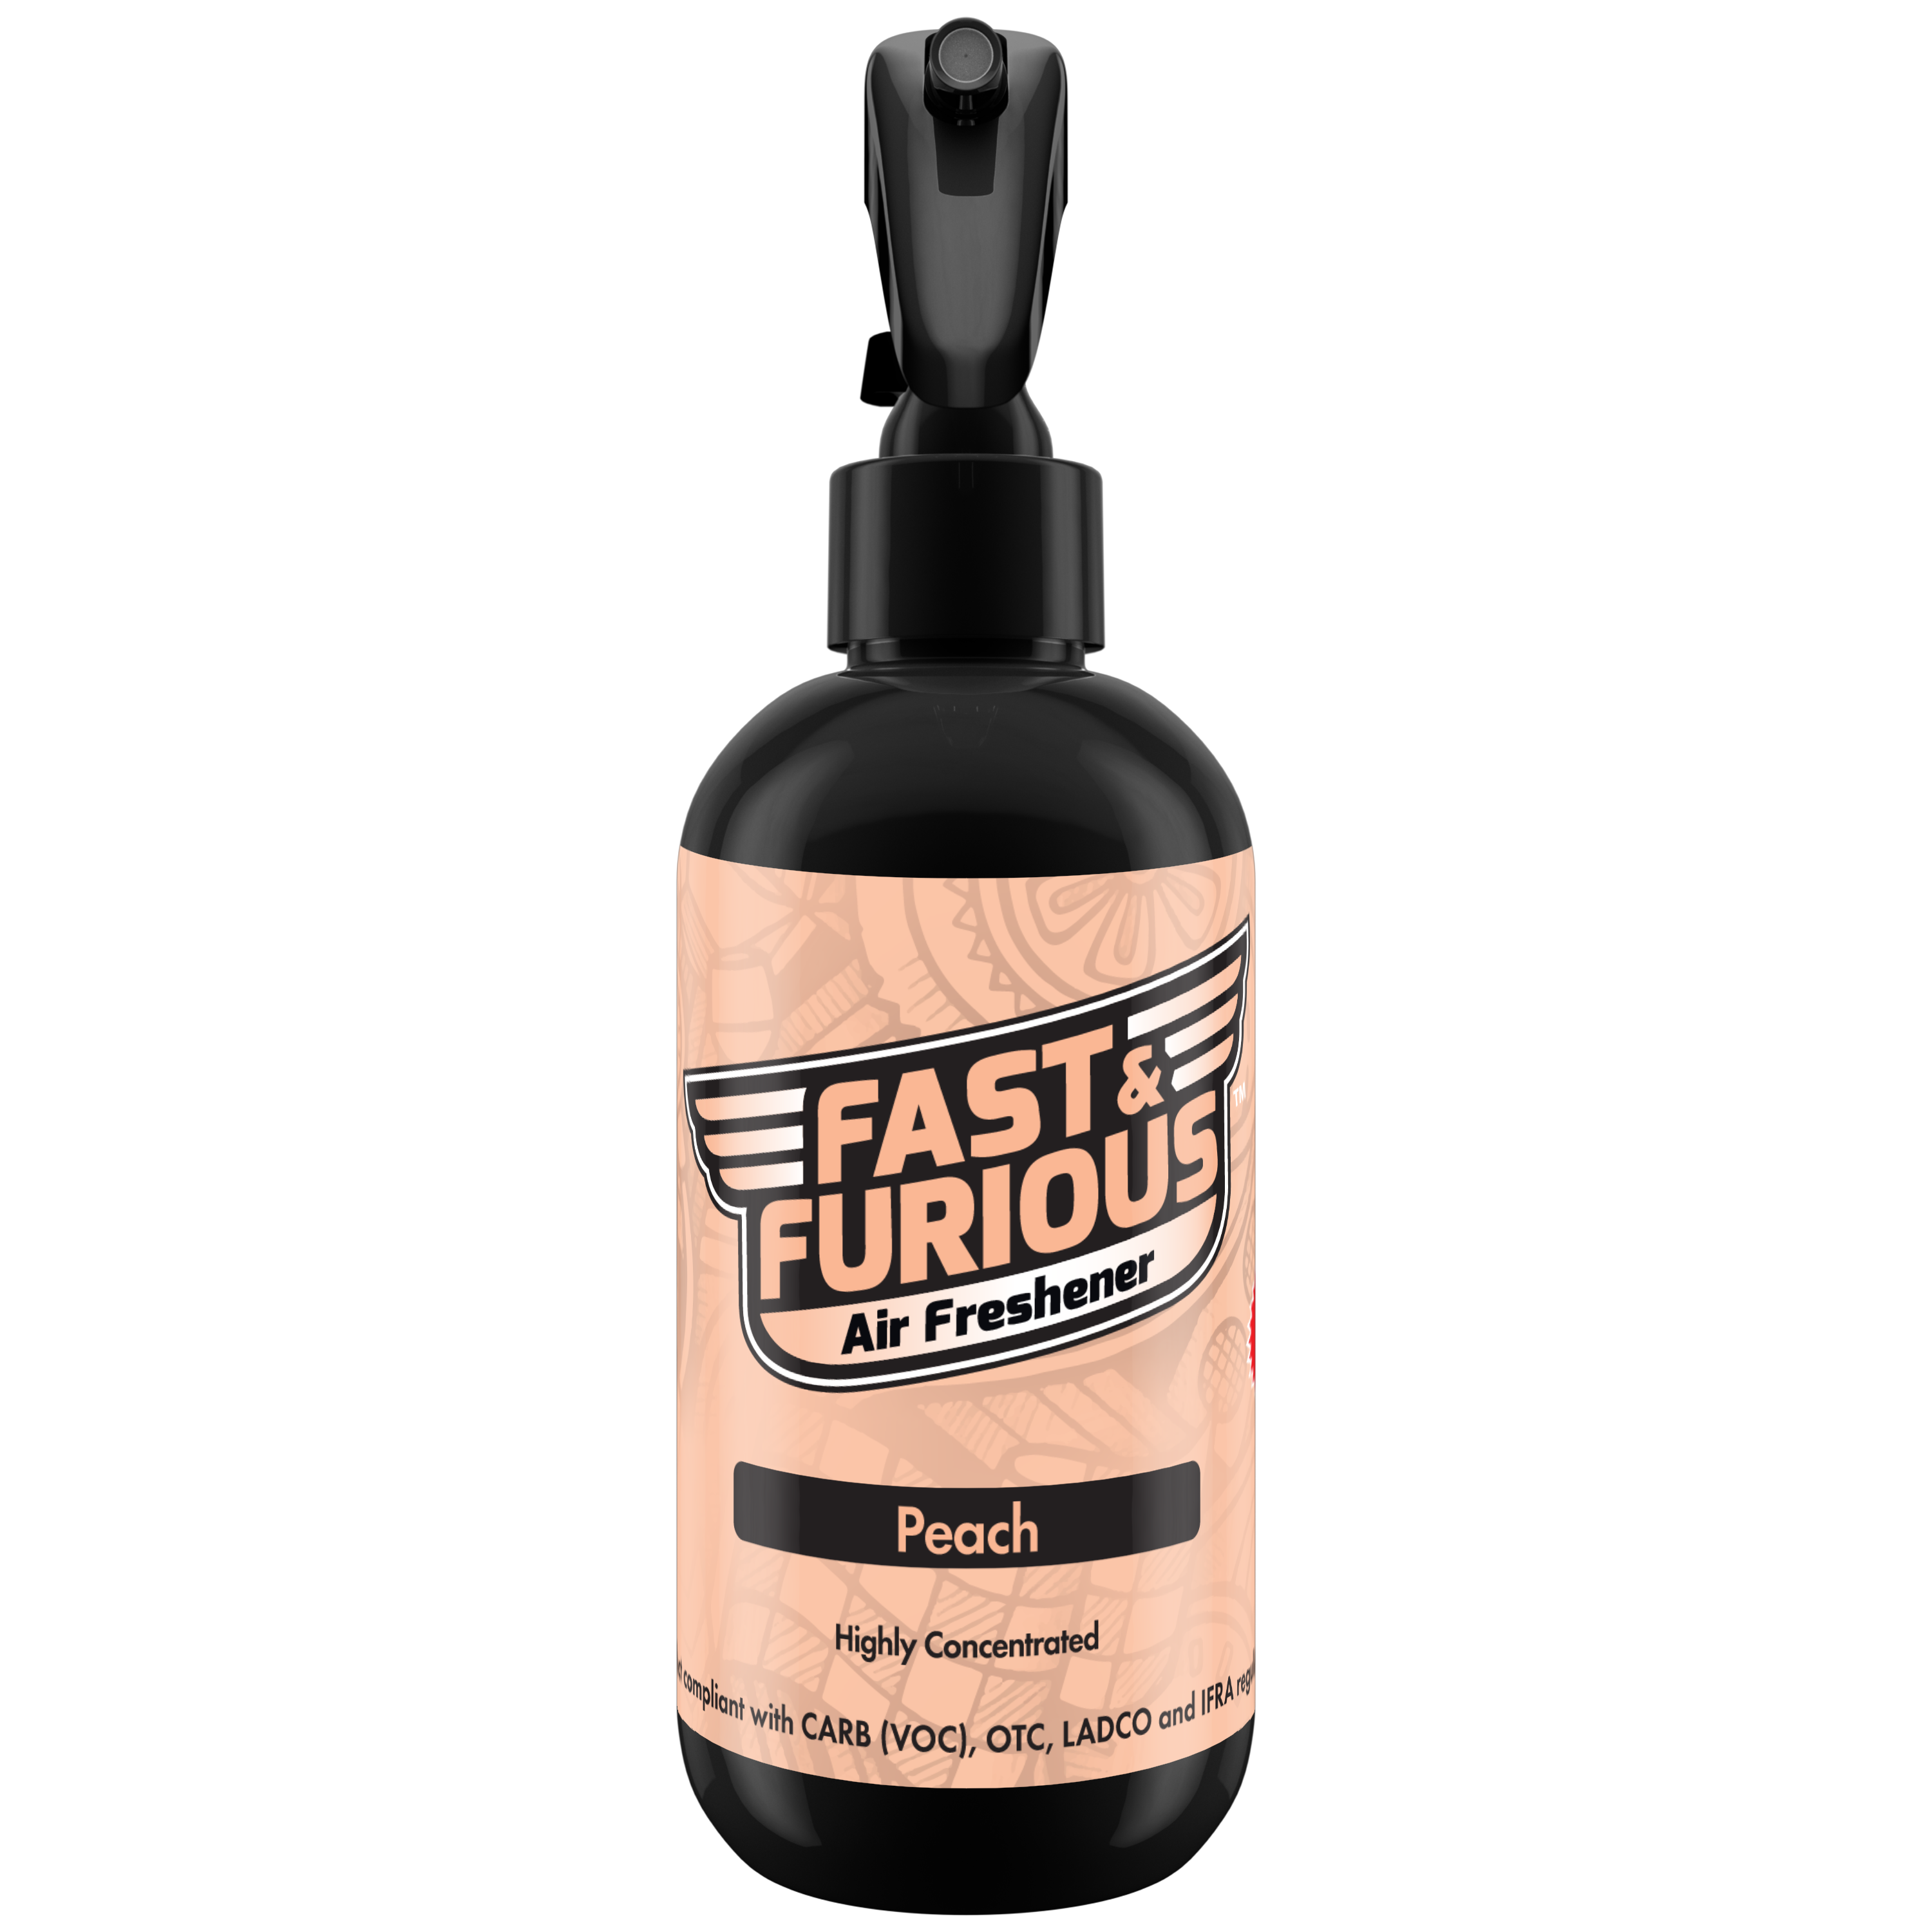 Fast and Furious Air Freshener - Peach Scent Size: 8oz